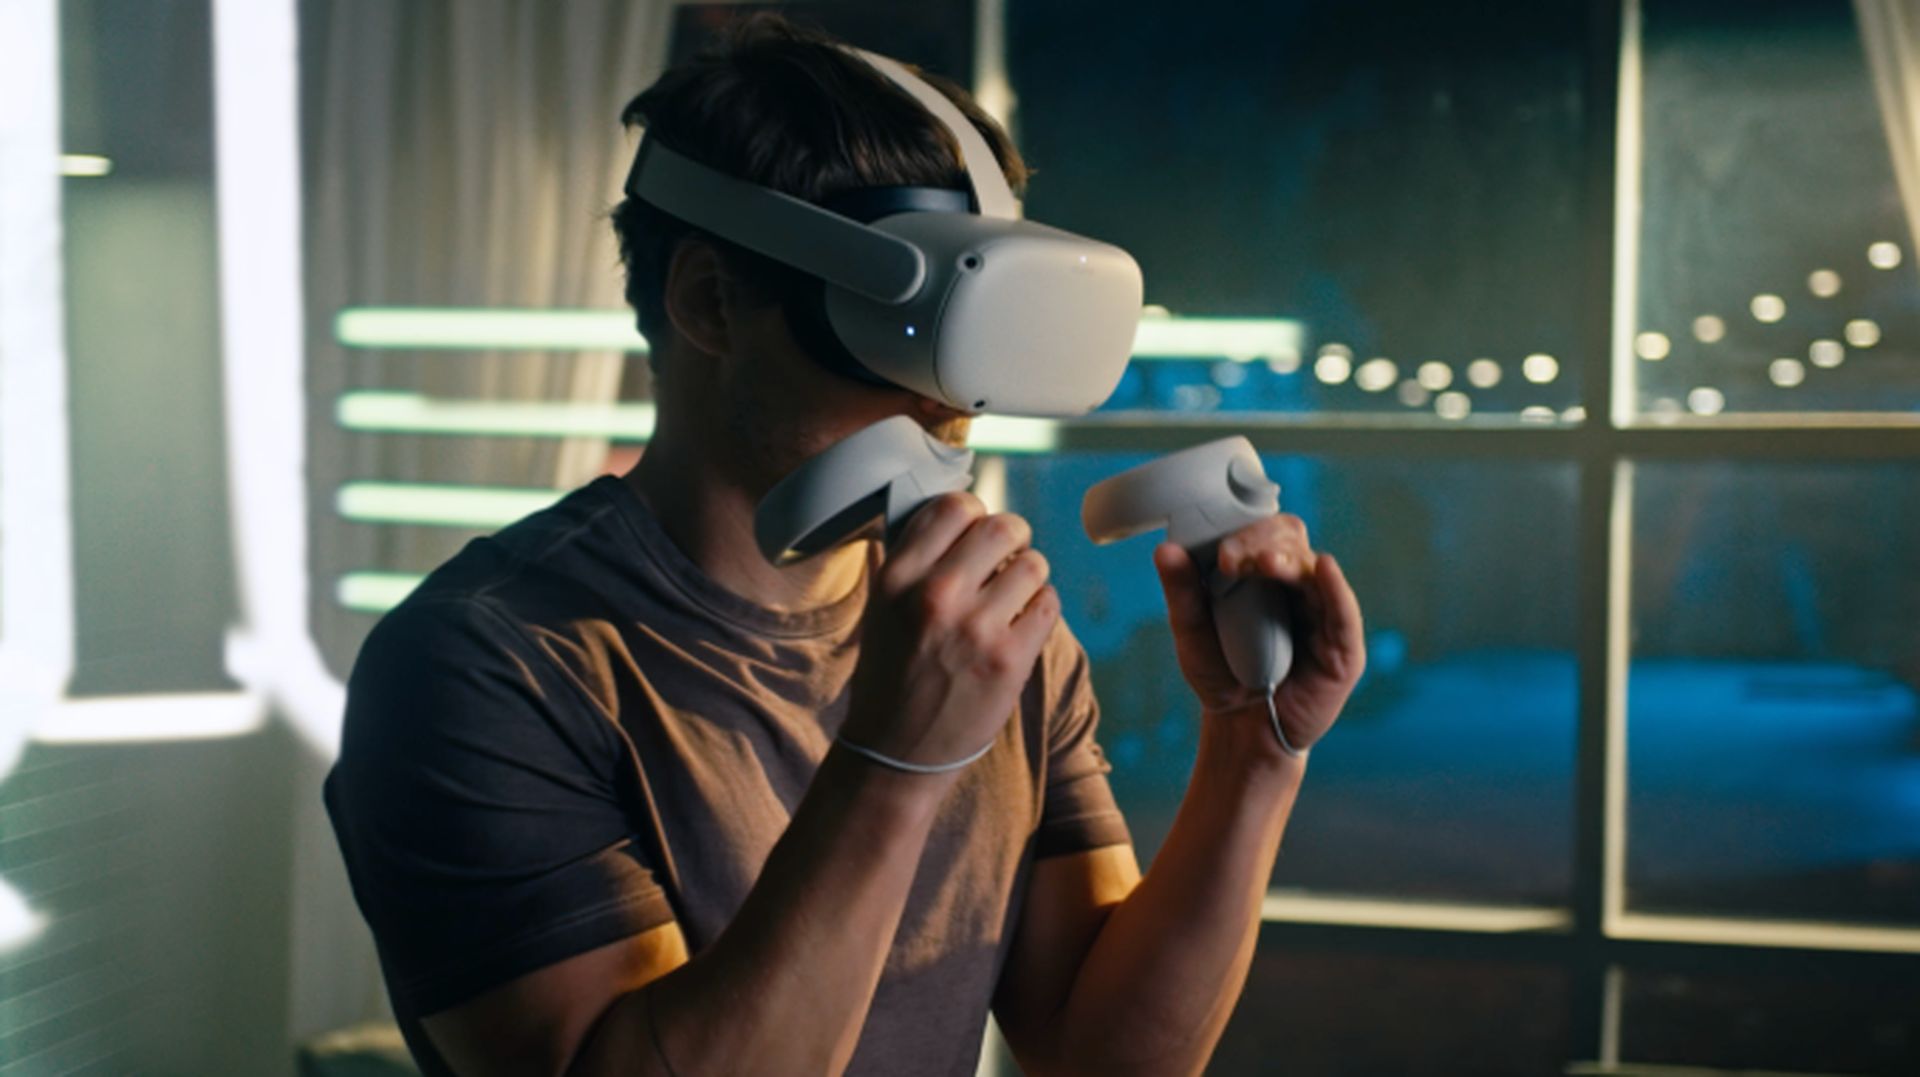 In this article, we are going to be covering how to cast Oculus Quest 2 to Samsung TV easily, so you can share the things going on in the headset with others.